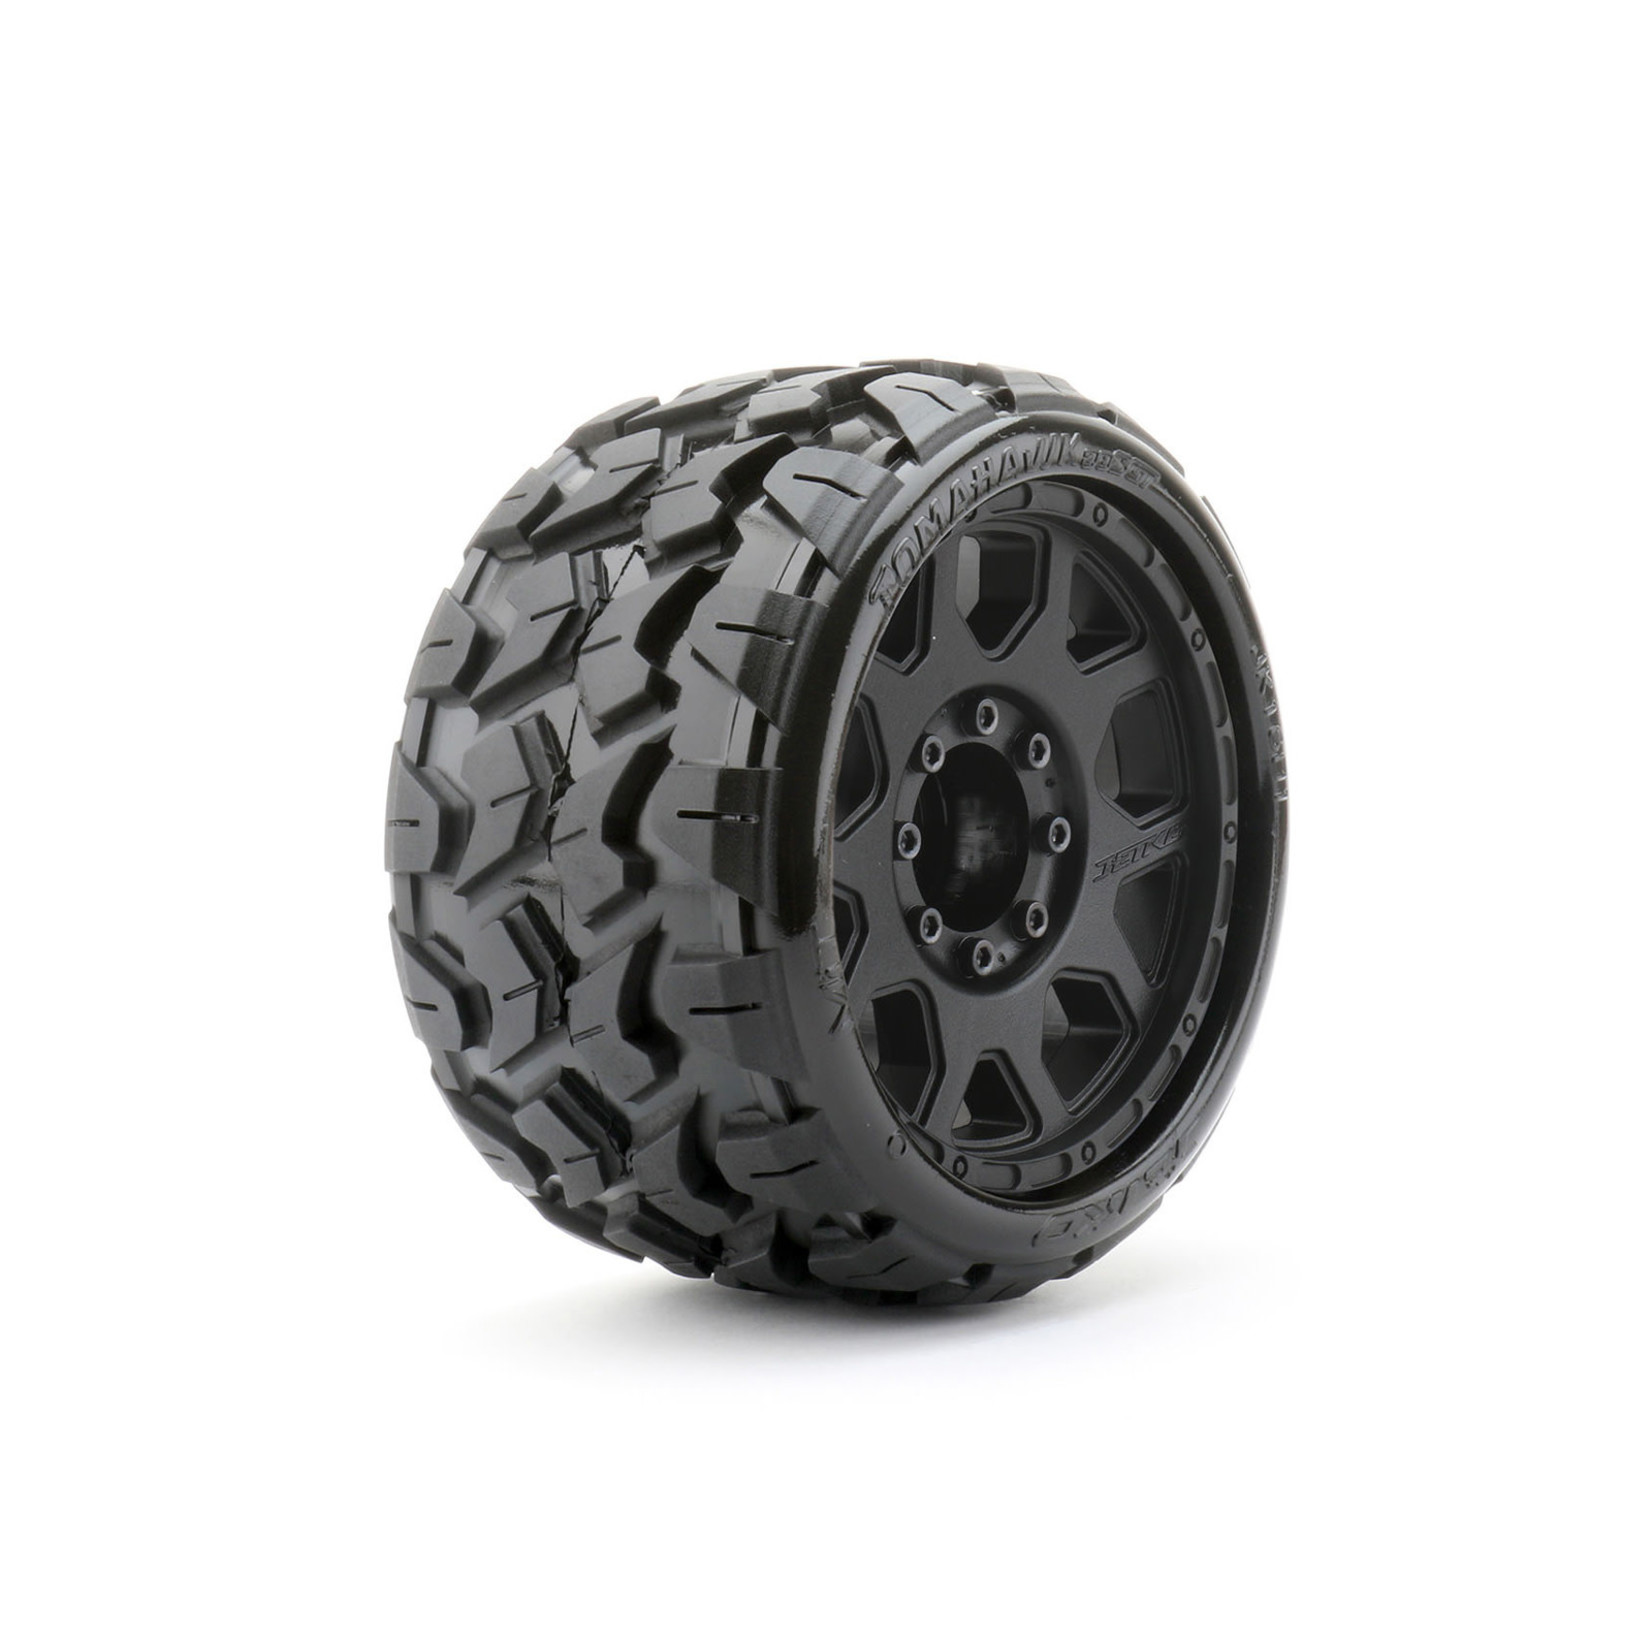 Jetko Tires Jetko Tires 1/8 SGT 3.8 Tomahawk Tires Mounted on Black Claw Rims, Medium Soft, Belted, 17mm 1/2" Offset (2) #JKO1601CBMSGBB2